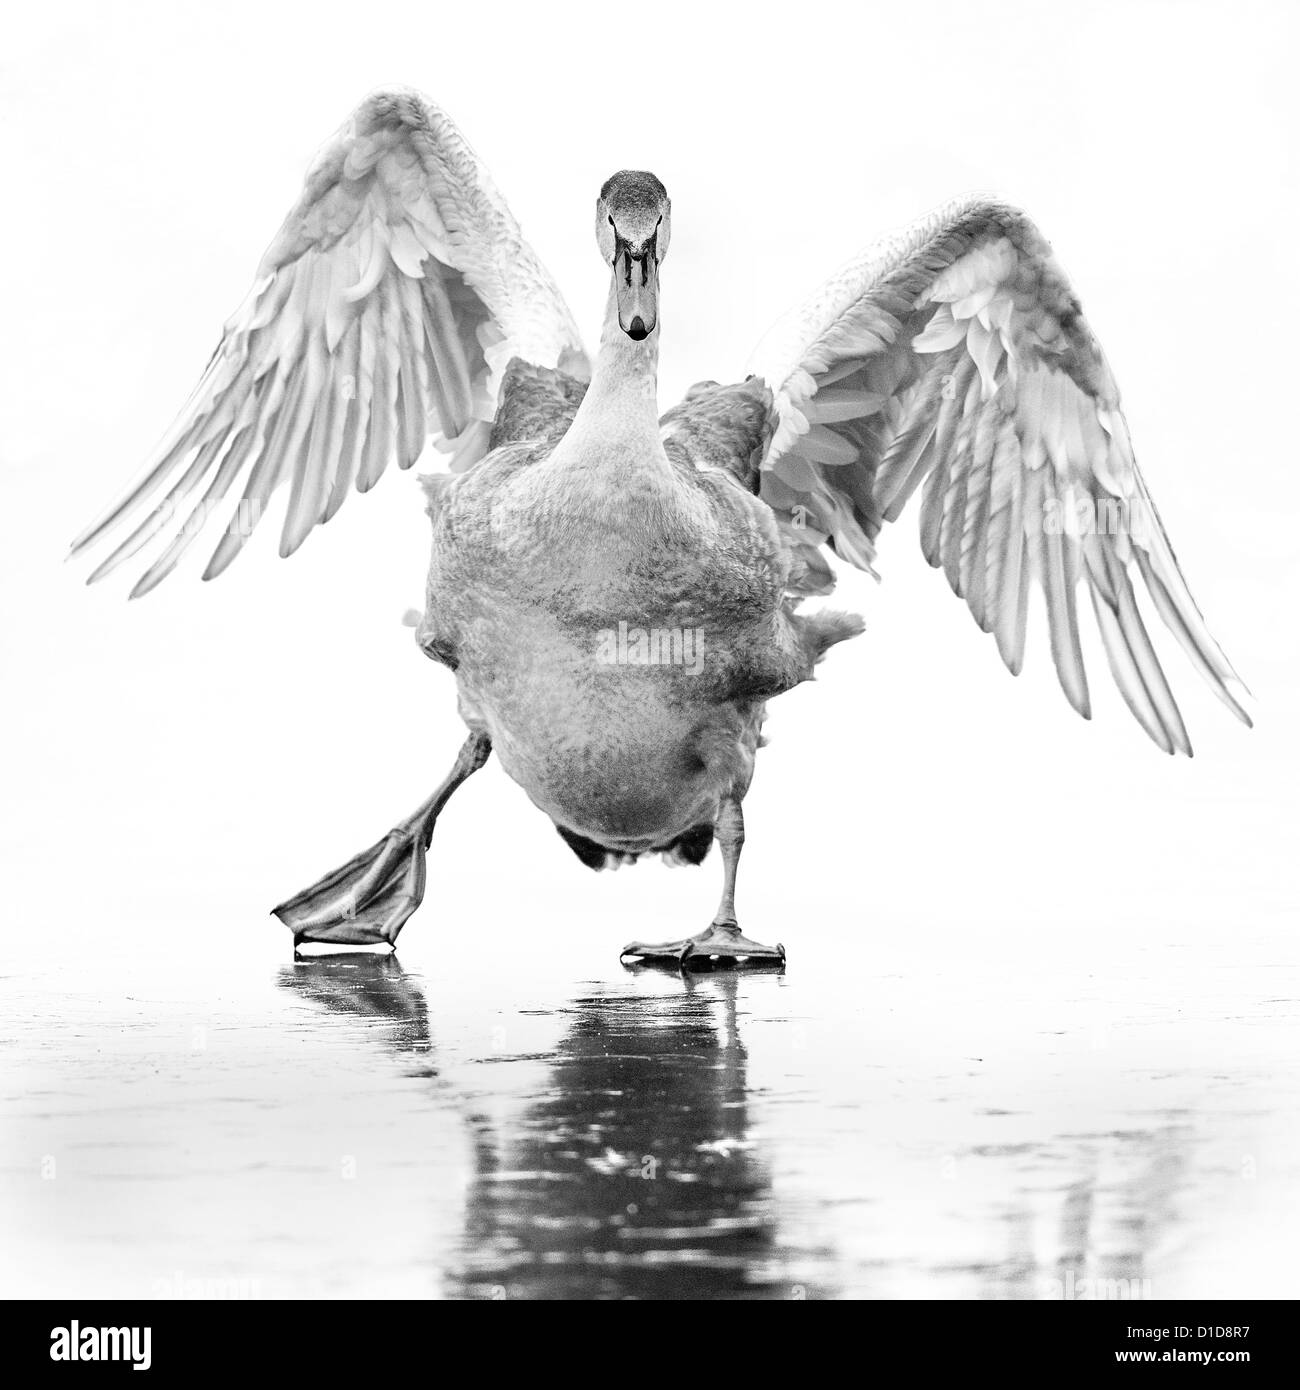 A young mute swan (cygnus olor) slips about on a frozen lake in the Lee valley, England. Monochrome image. Stock Photo